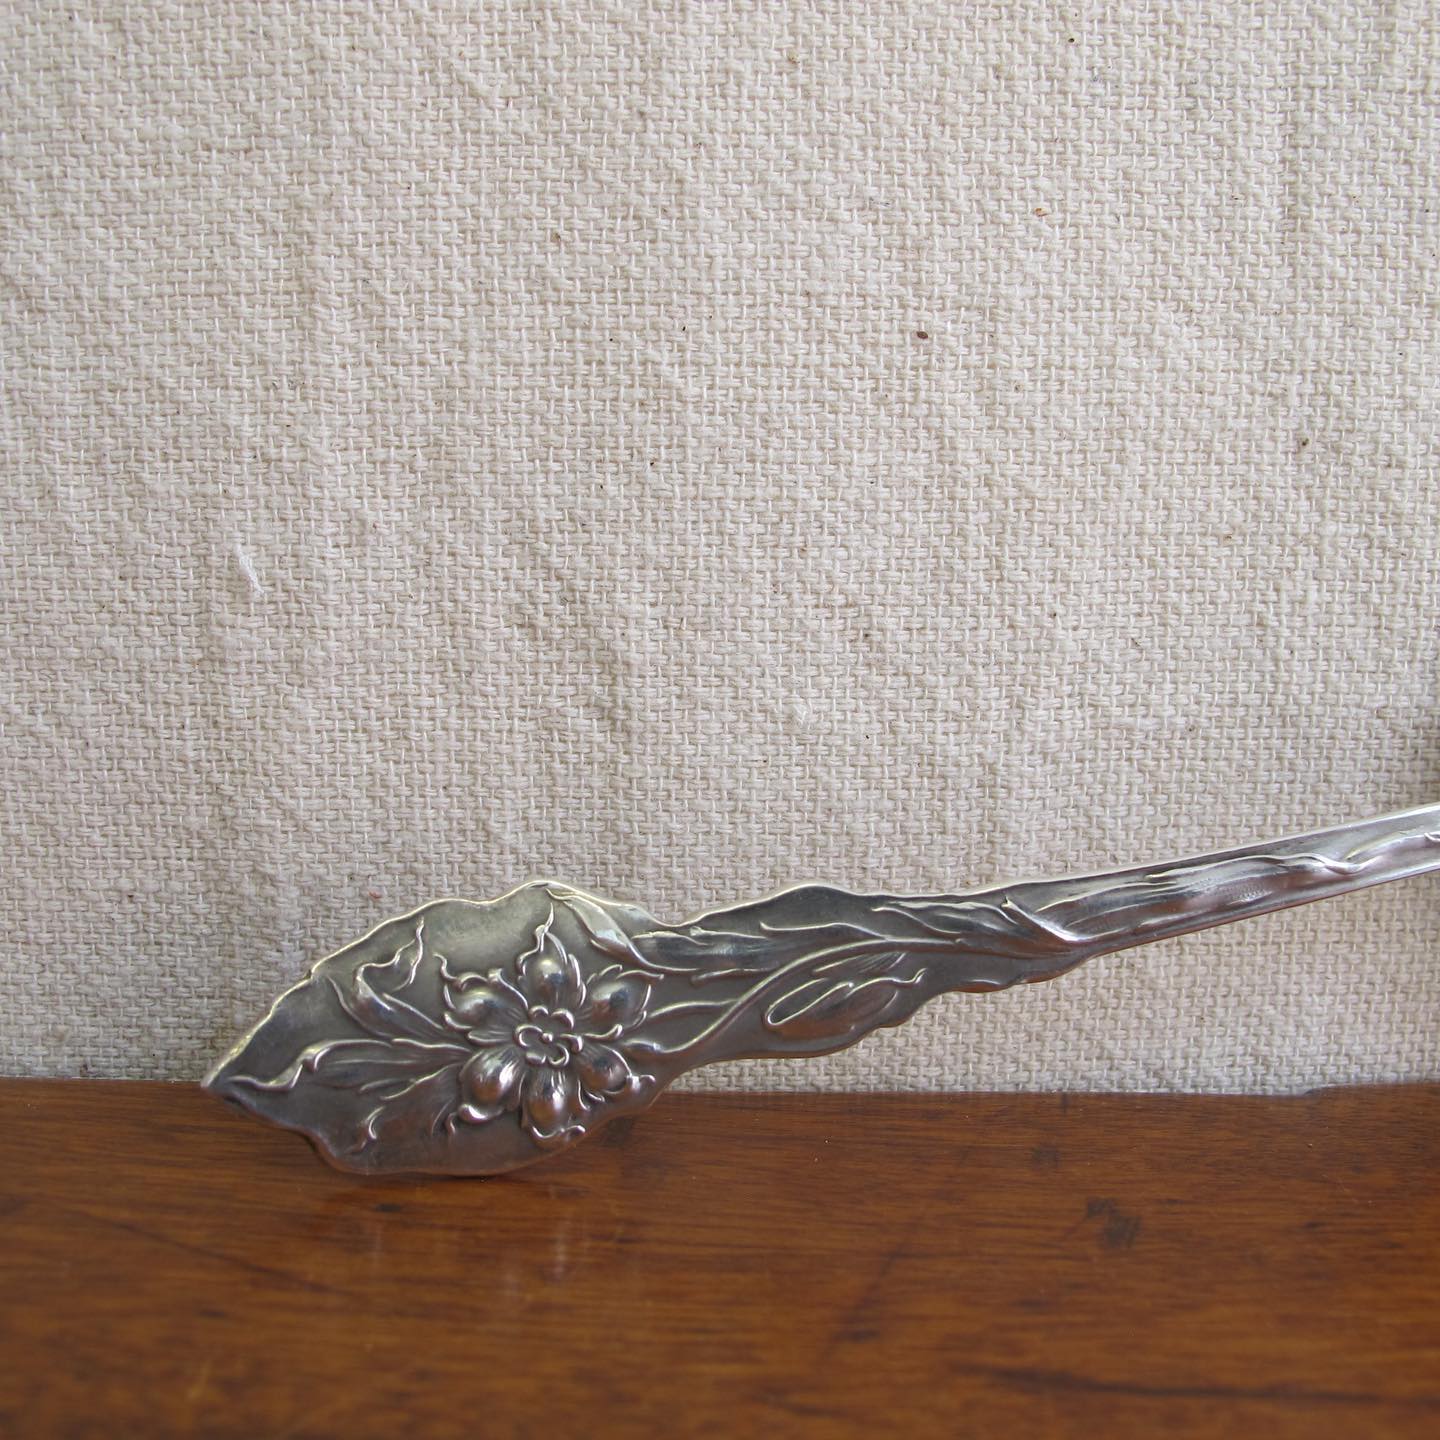 Edwardian / Victorian sterling silver reticulated tomato server or small cake server, beautiful crisp quality, c. 1900